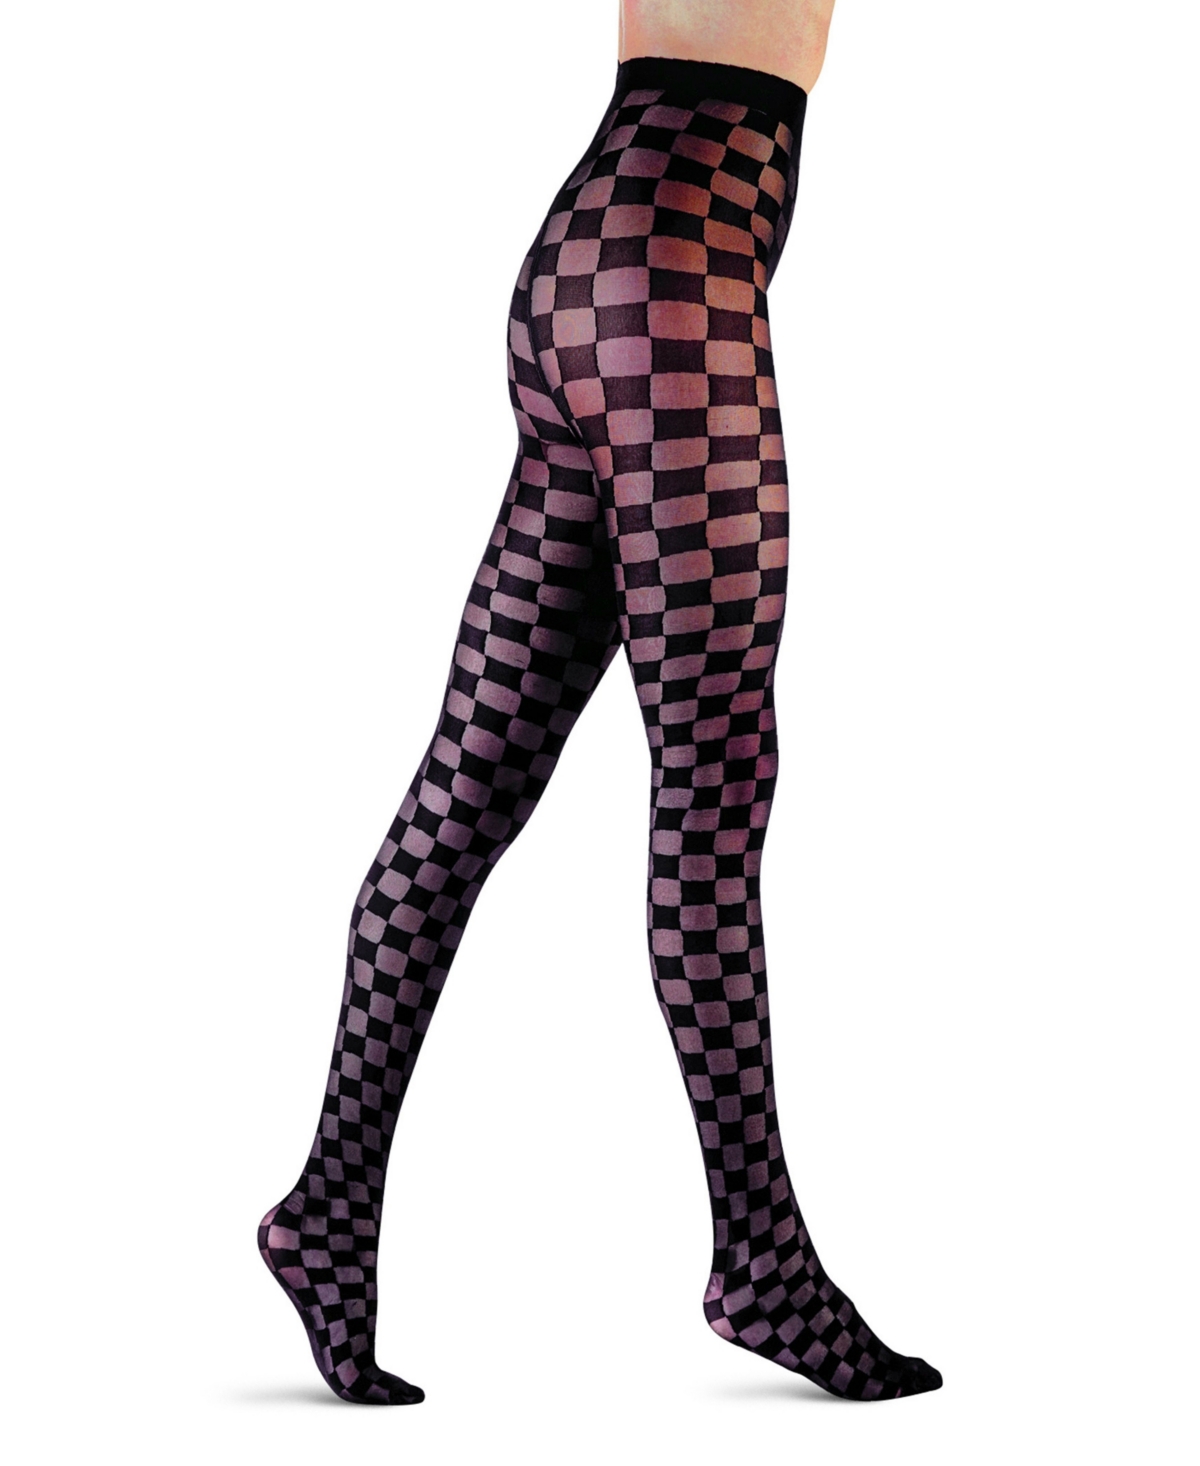 Lechery Women's European Made Checkered Tights In Black